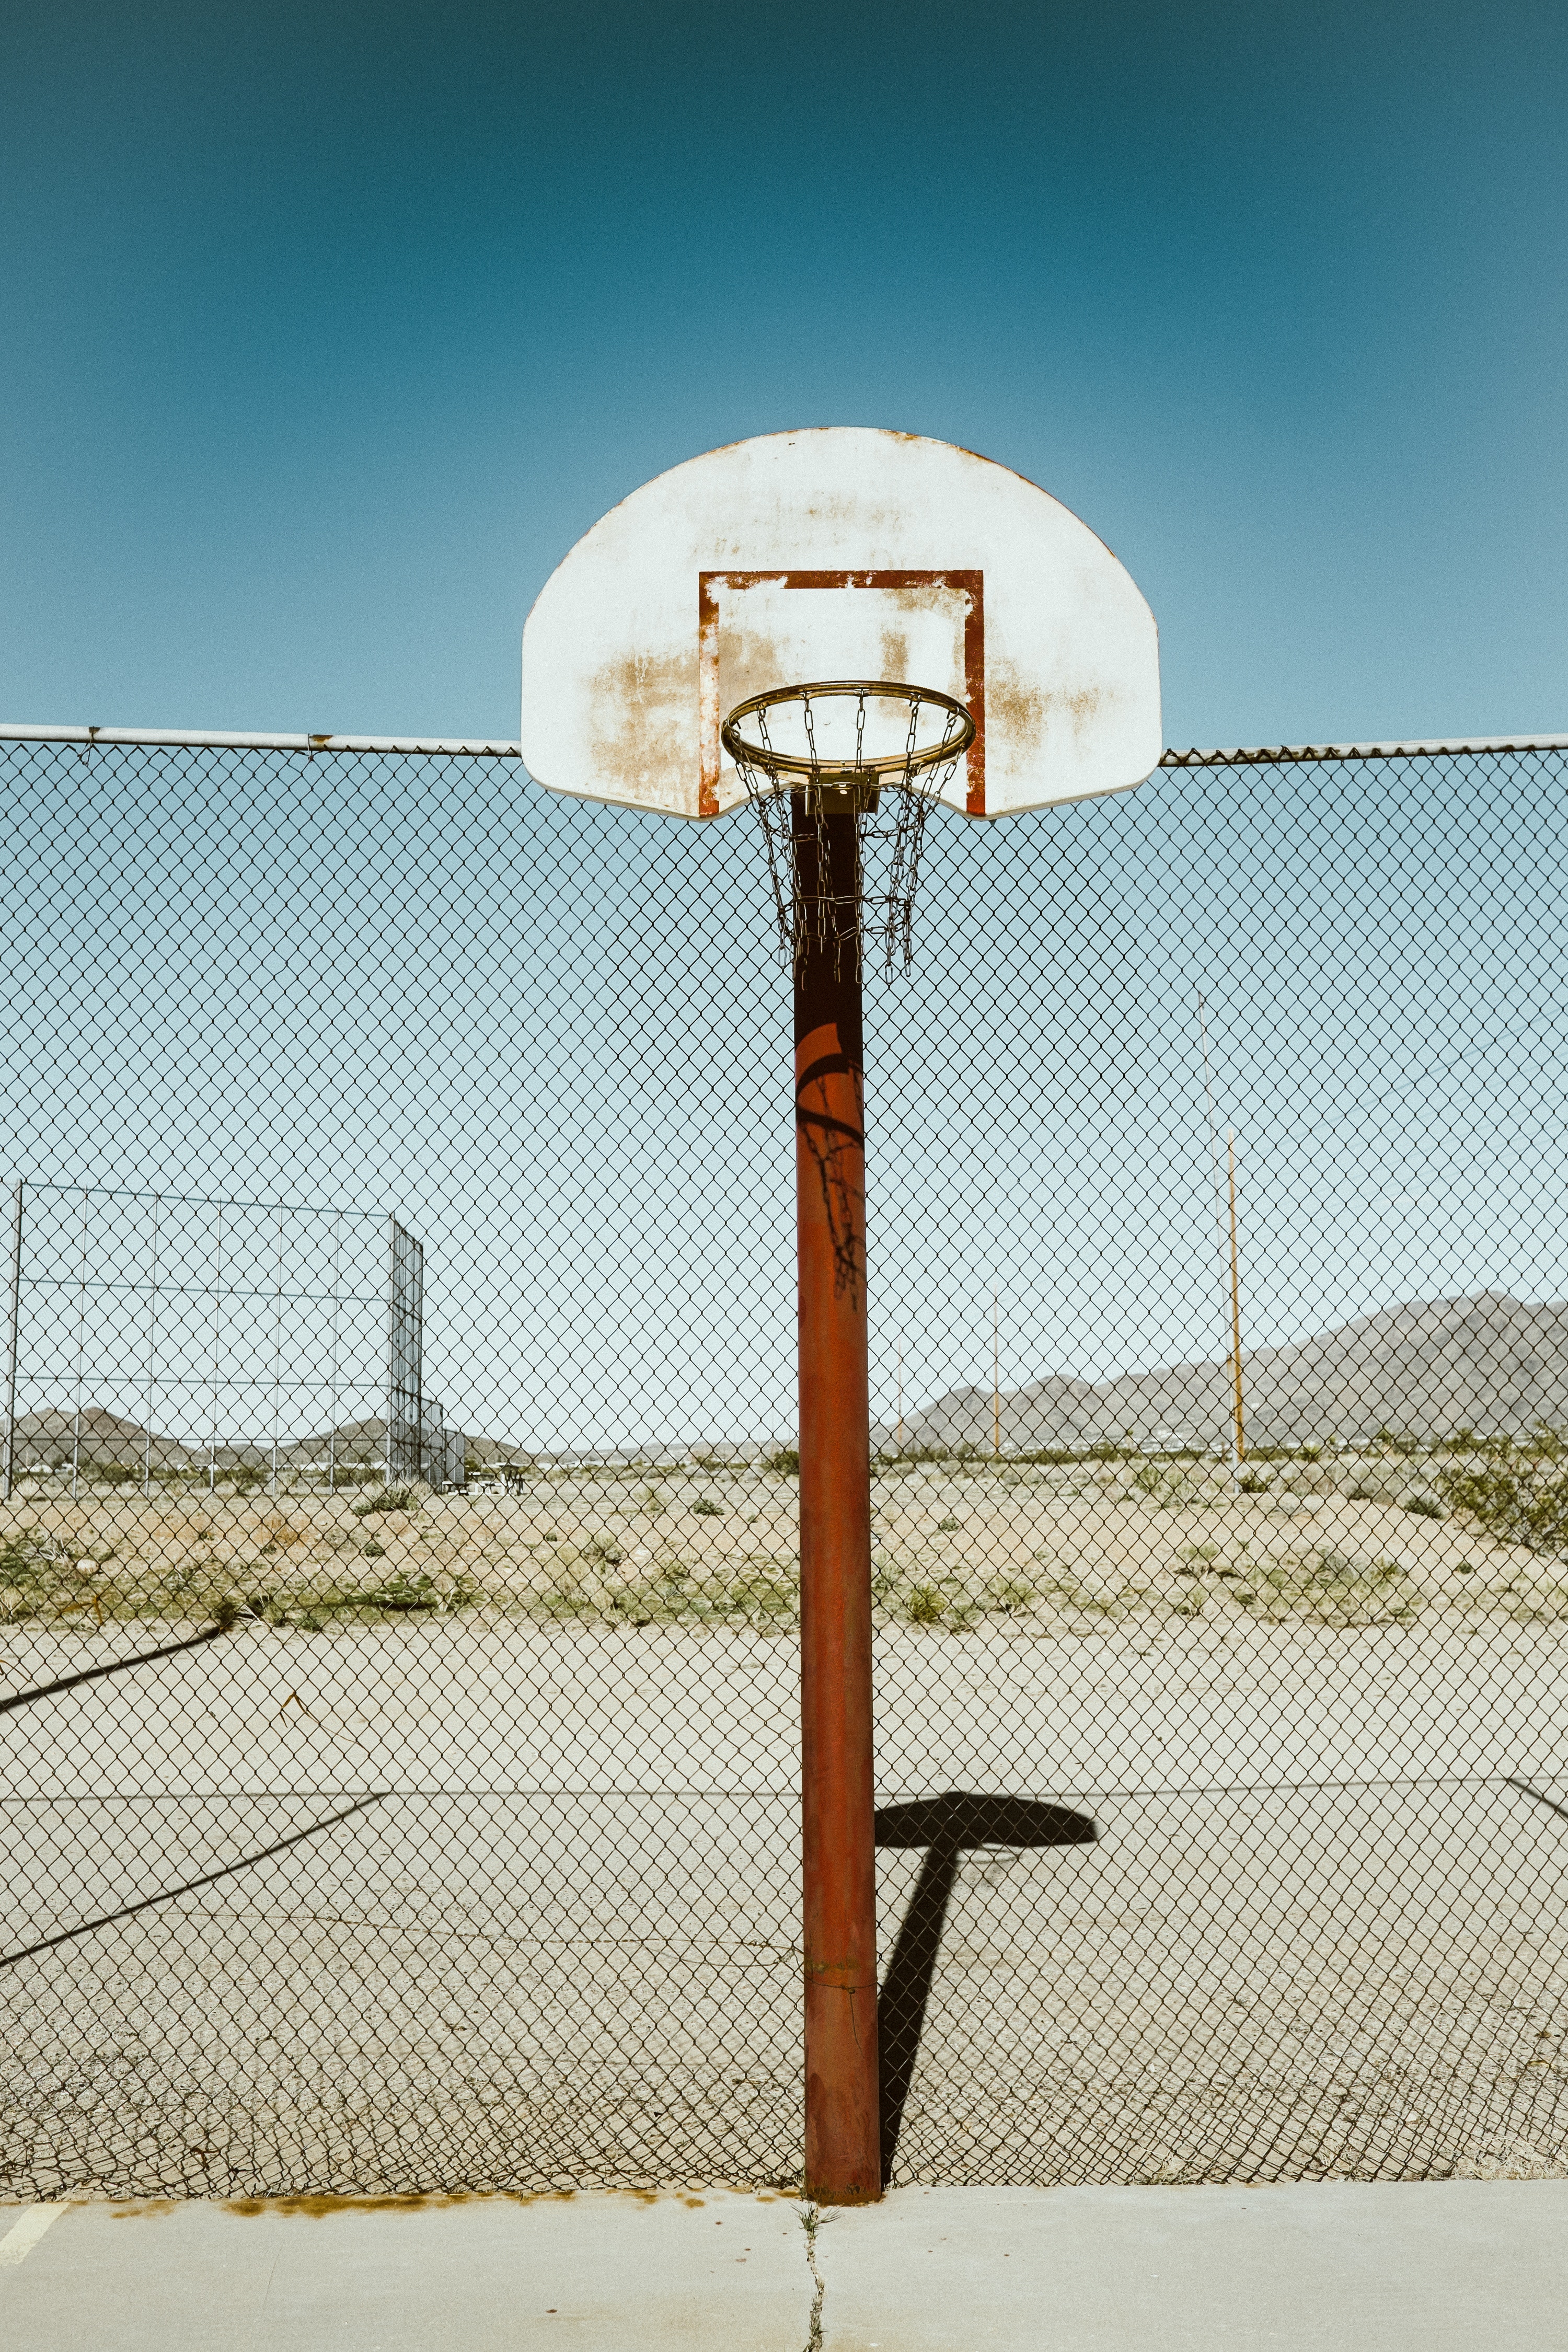 Widescreen image old, basketball court, sports, grid